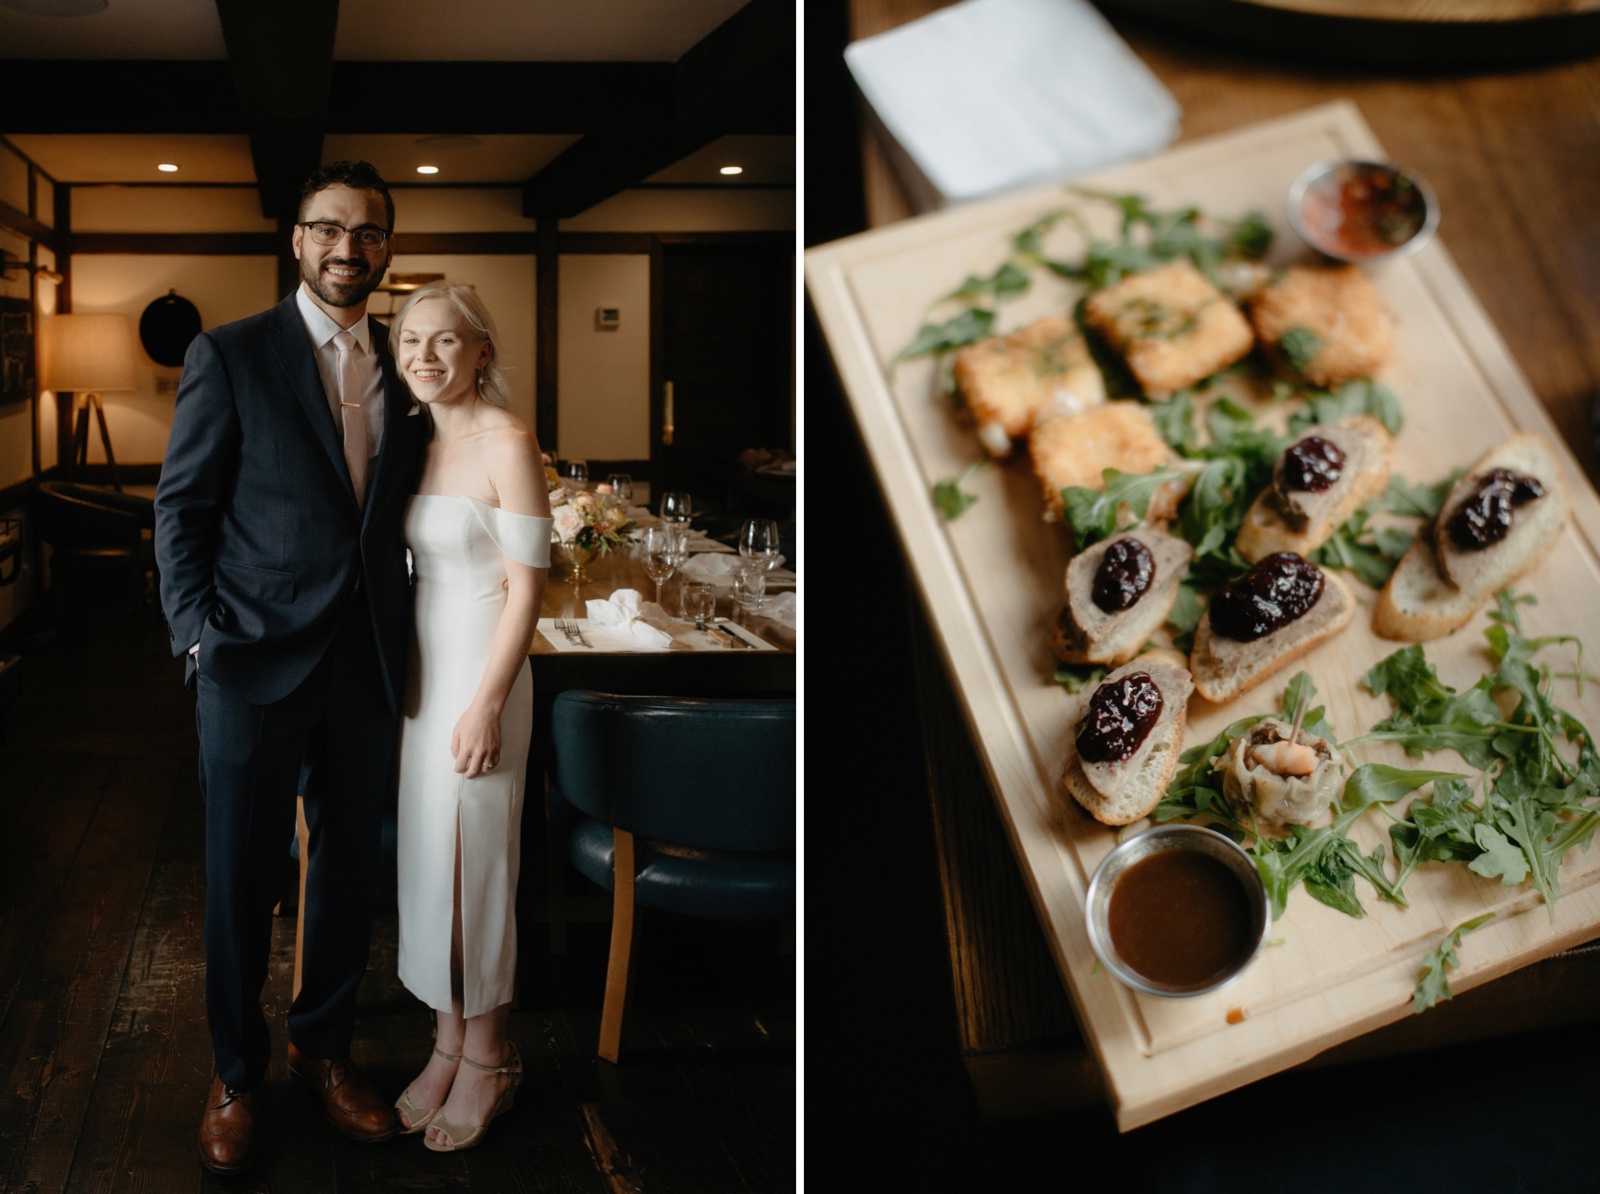 Couple celebrating their intimate wedding at Chuck' Steakhouse in Banff townsite